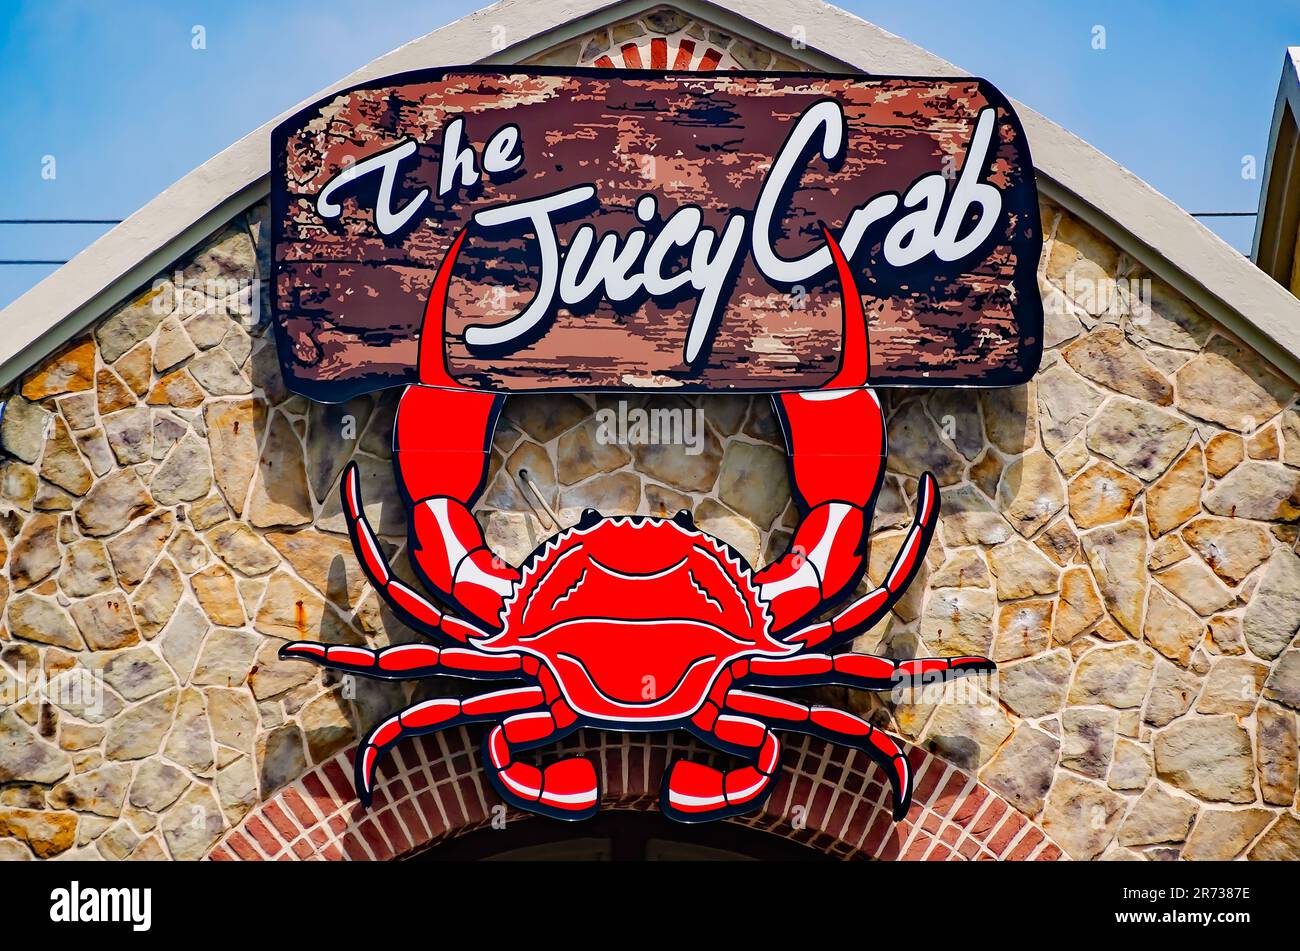 The Juicy Crab seafood restaurant is pictured, May 31, 2023, in Mobile, Alabama. The restaurant chain opened its first location in Duluth, Georgia. Stock Photo